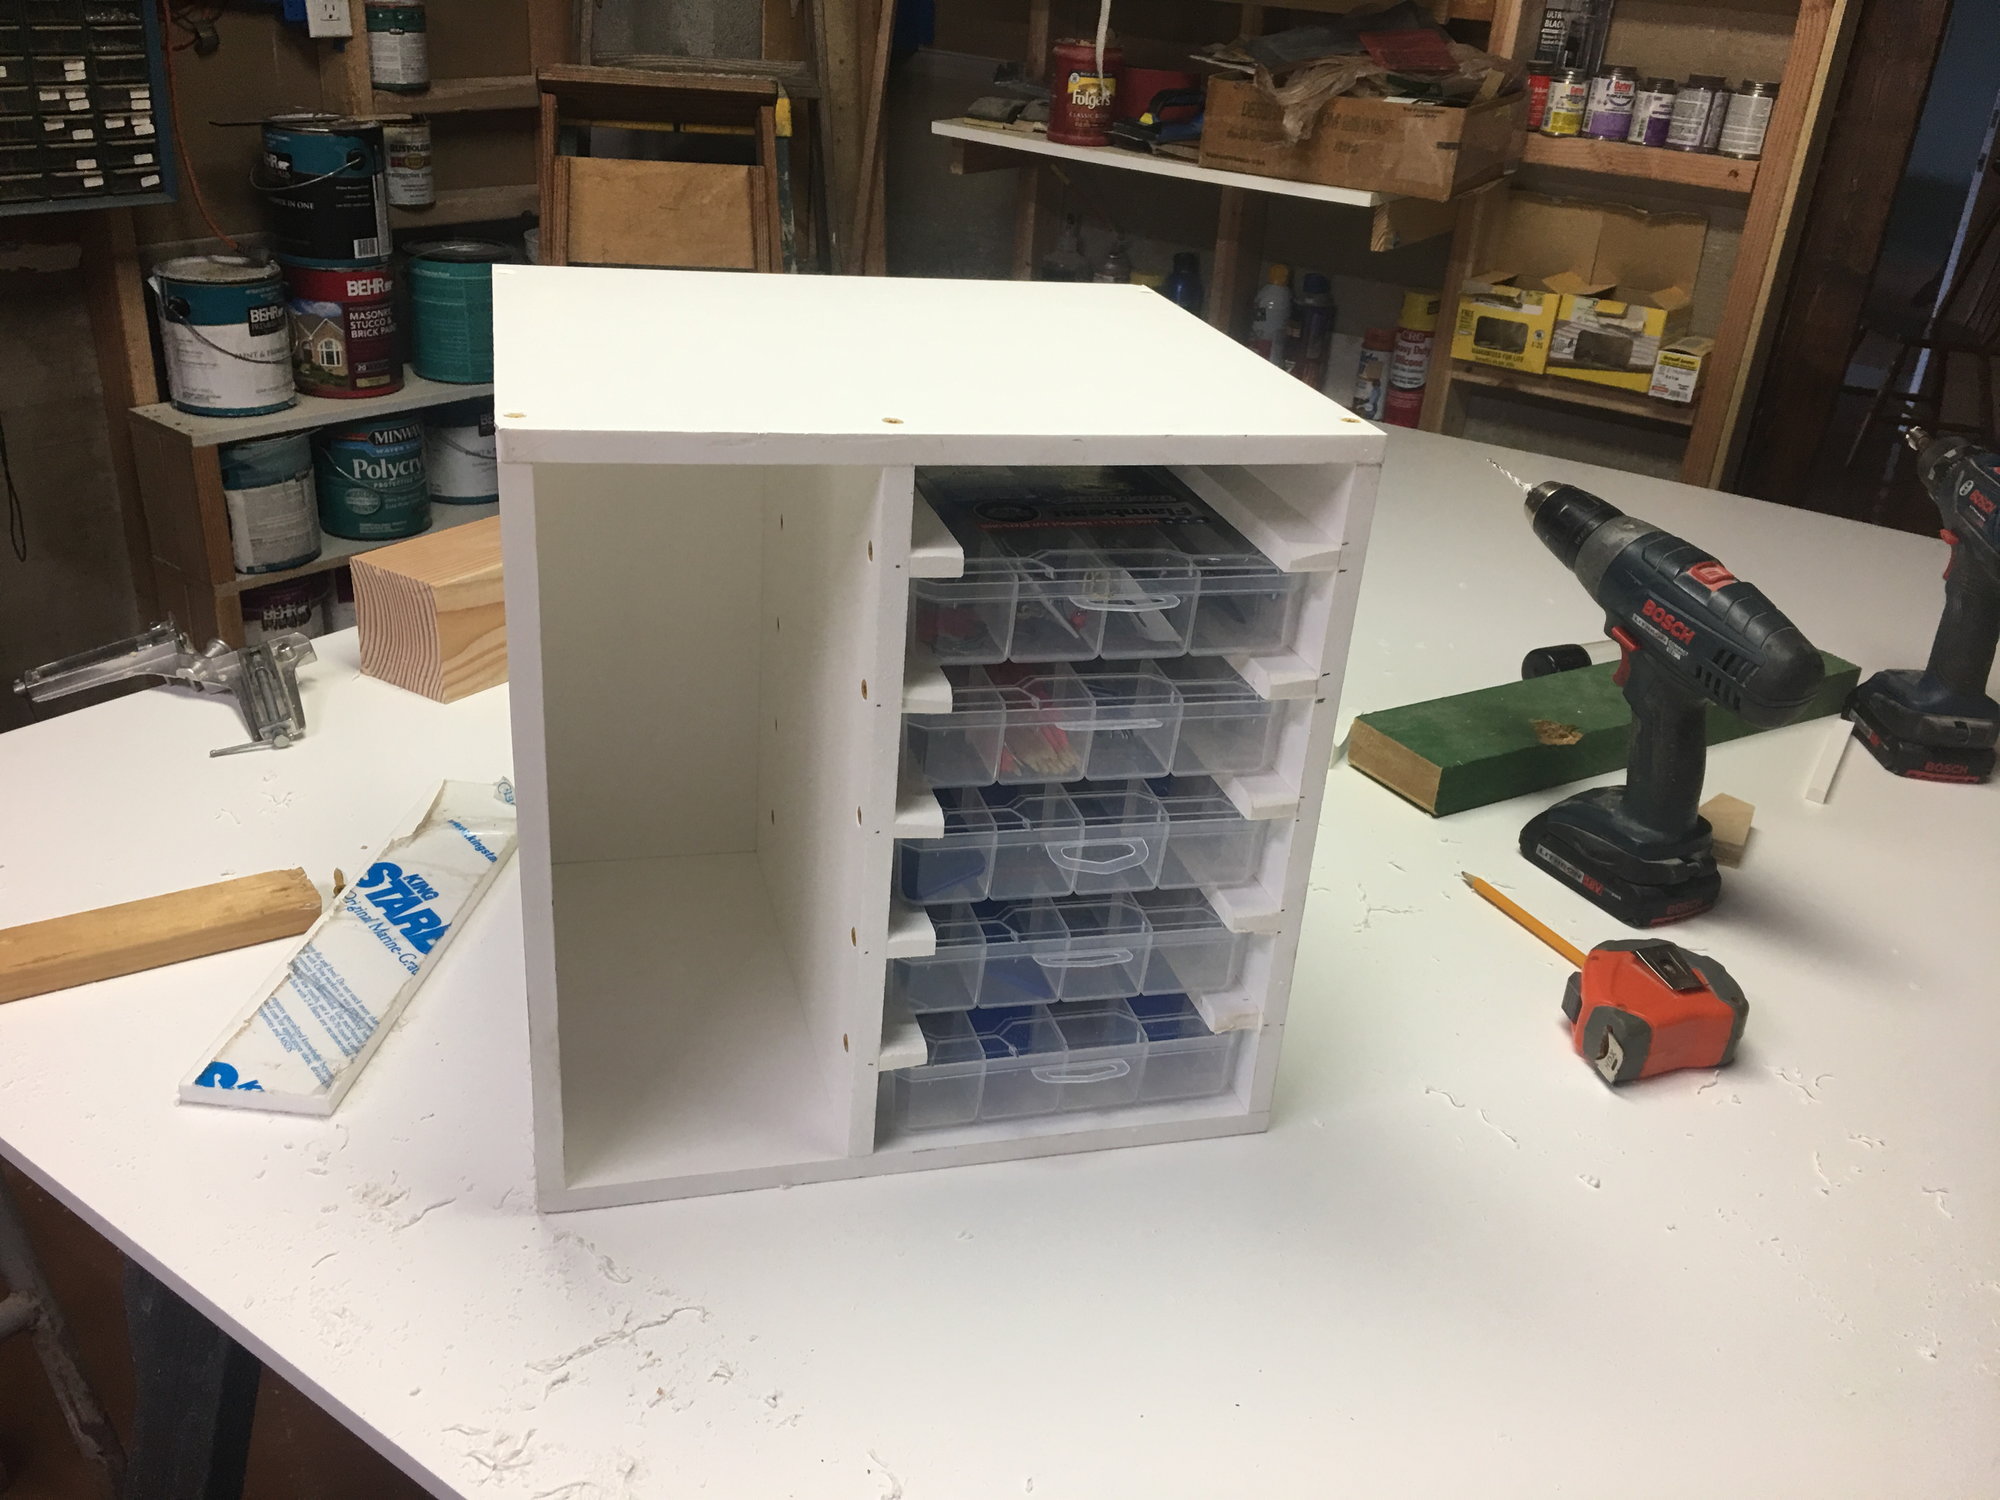 Organize Your Tackle with a Plano Box Holder